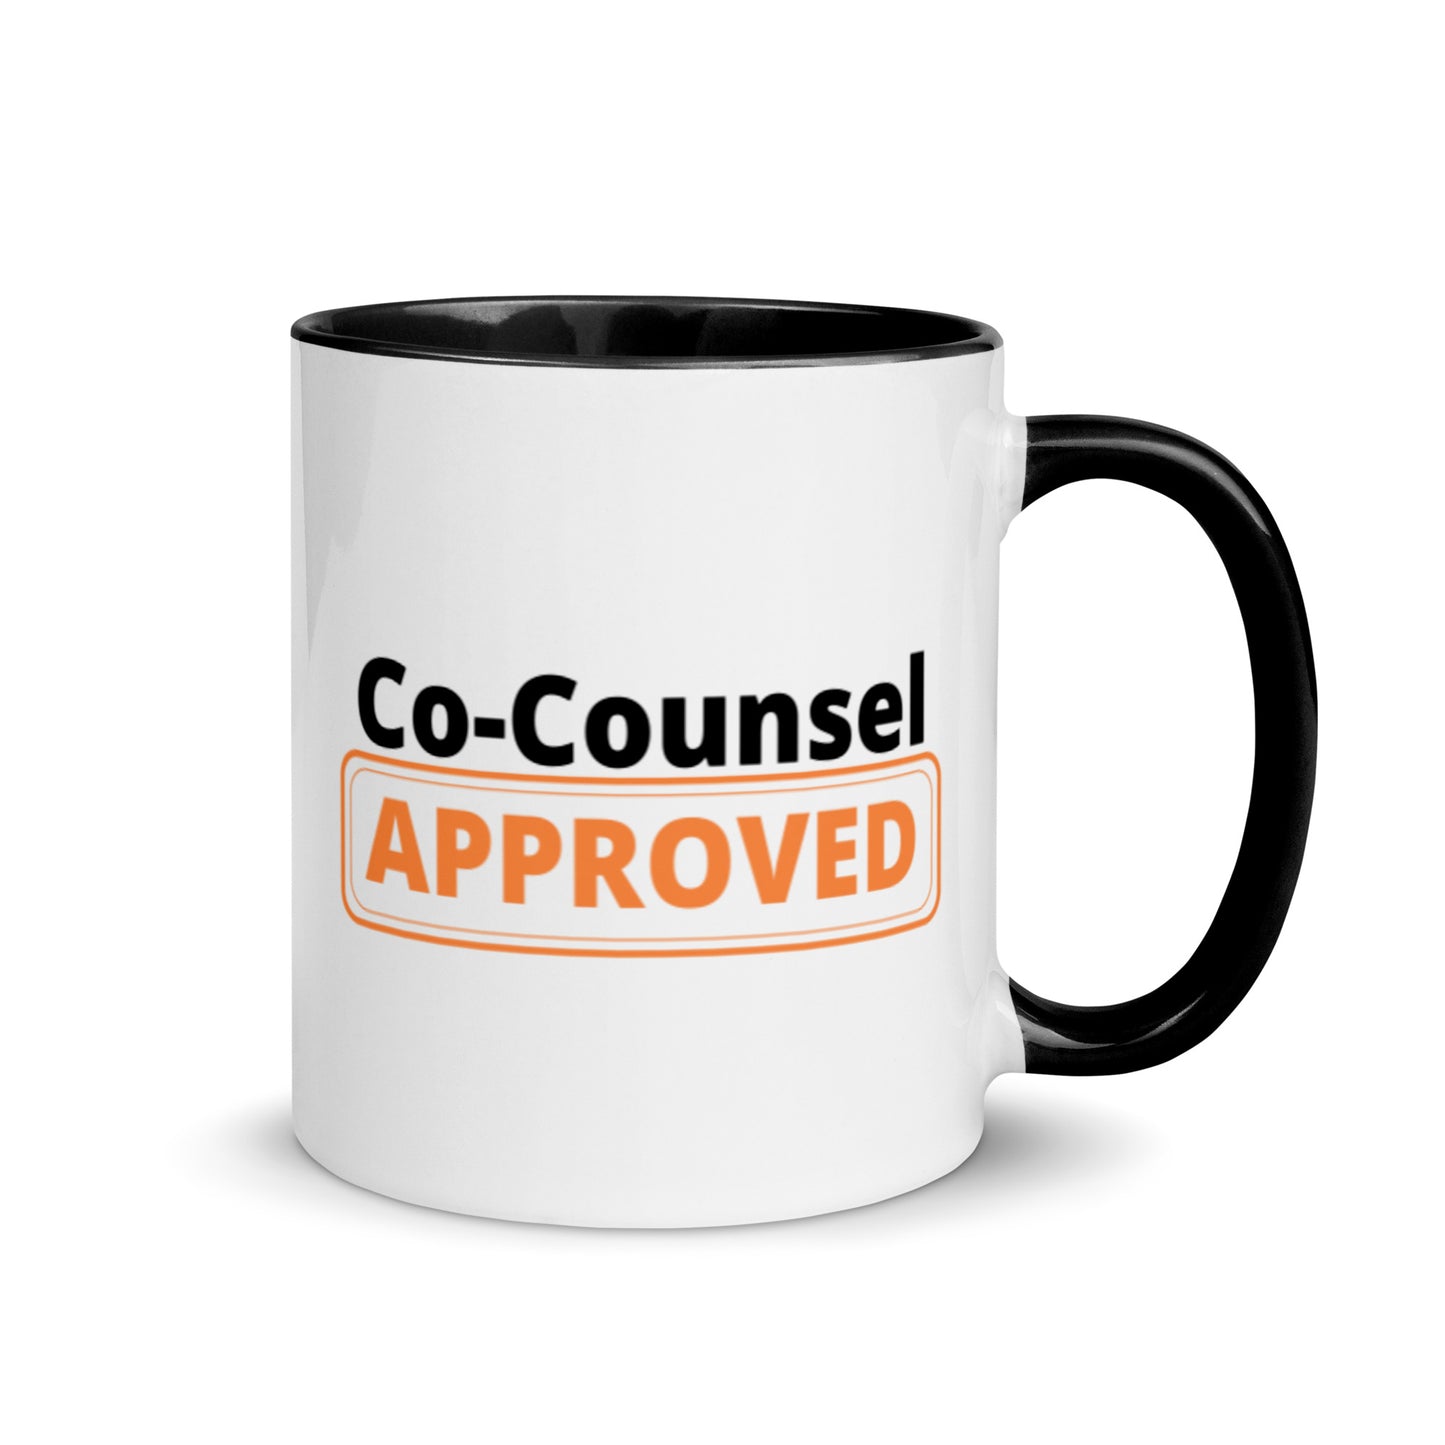 Co-Counsel Approved Mug